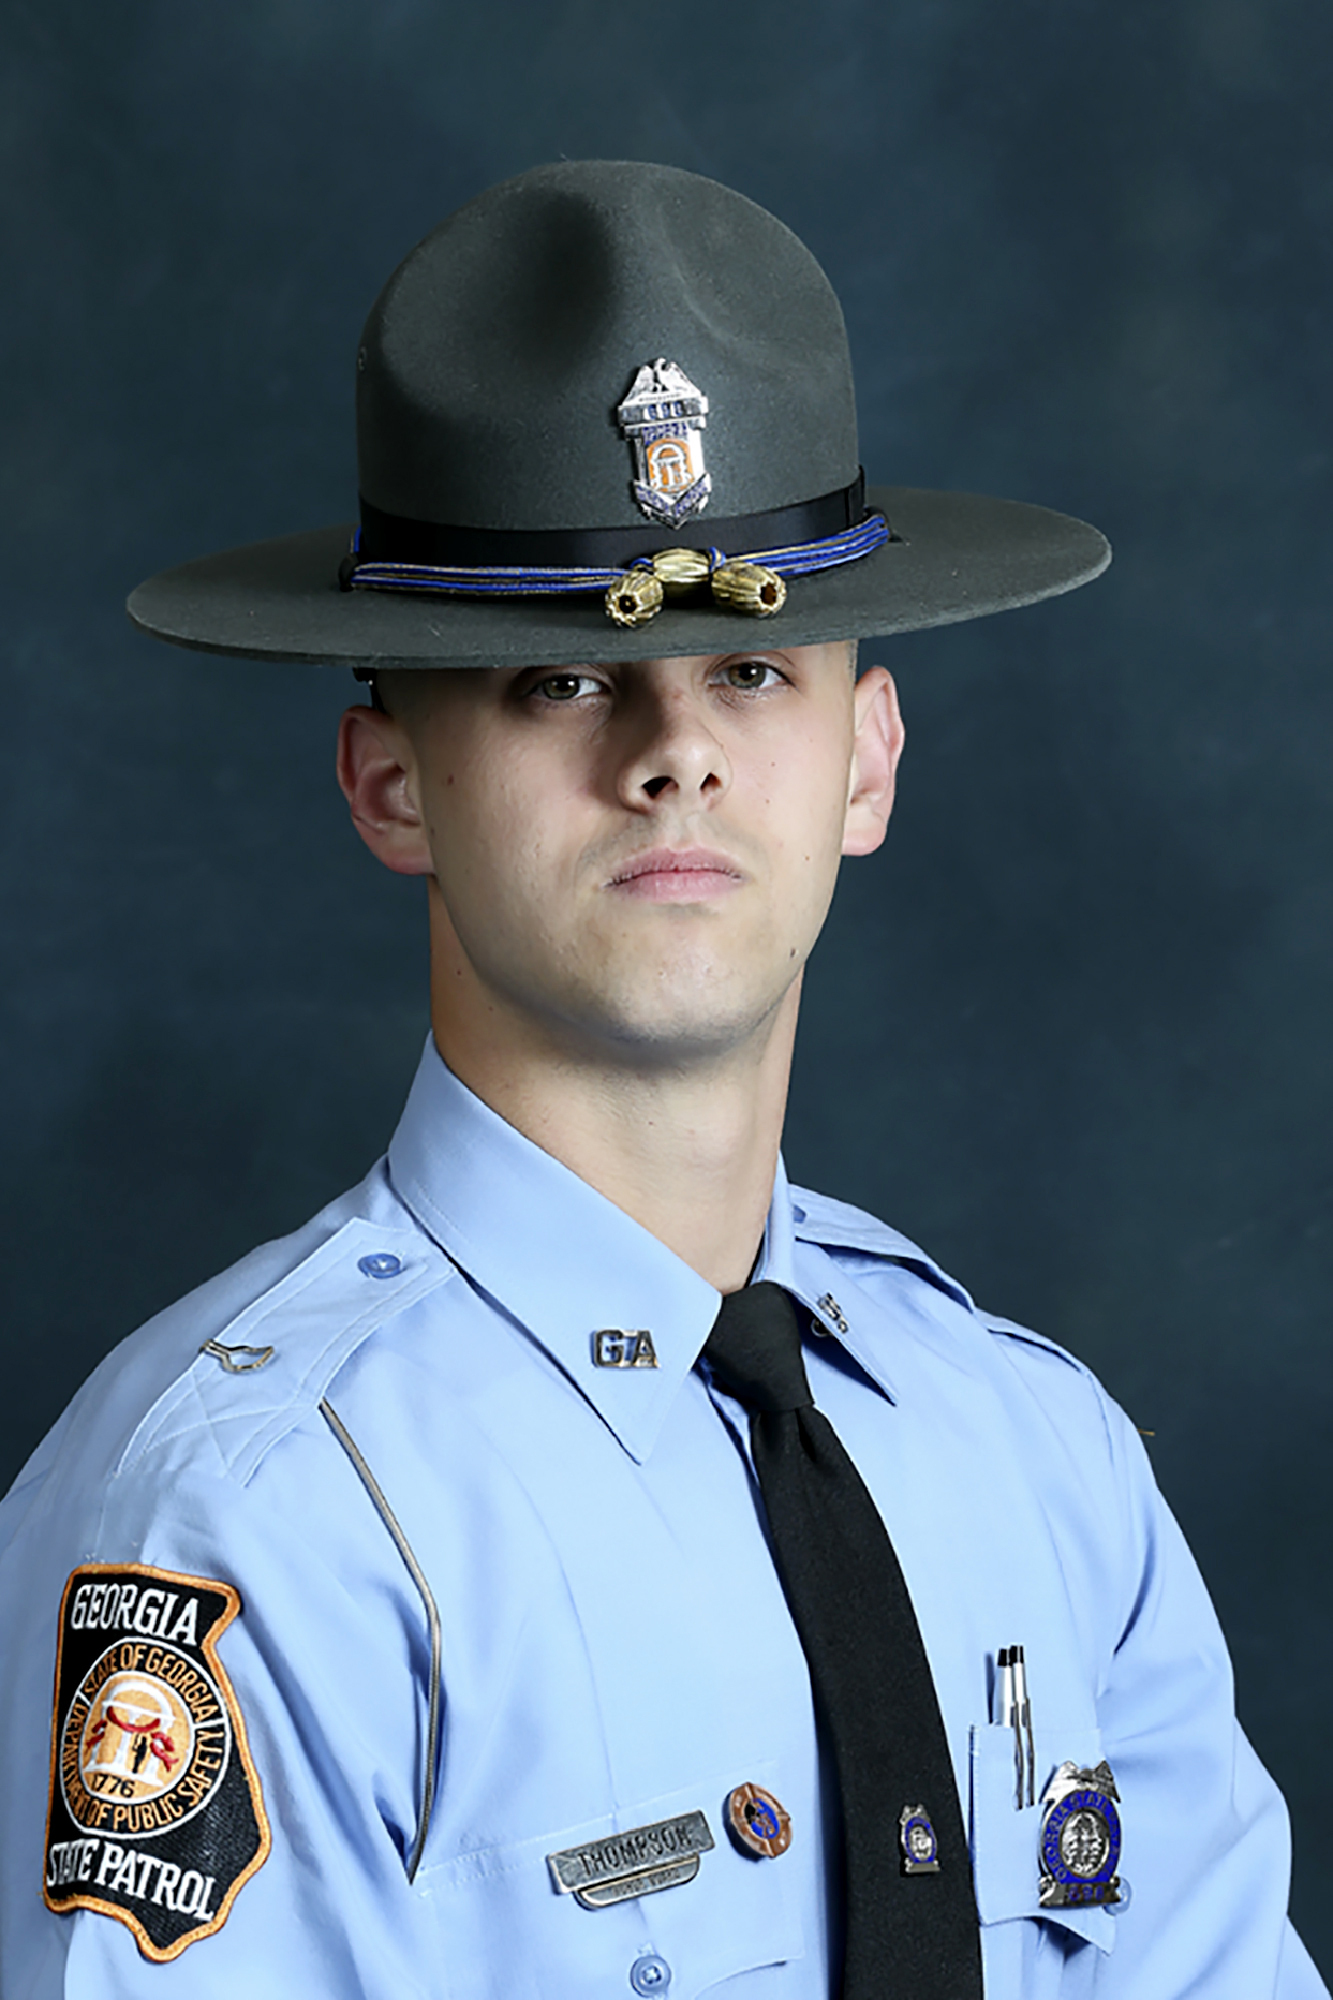 This undated photo released by the Georgia Department of Public Safety shows state trooper Jacob Gordon Thompson.